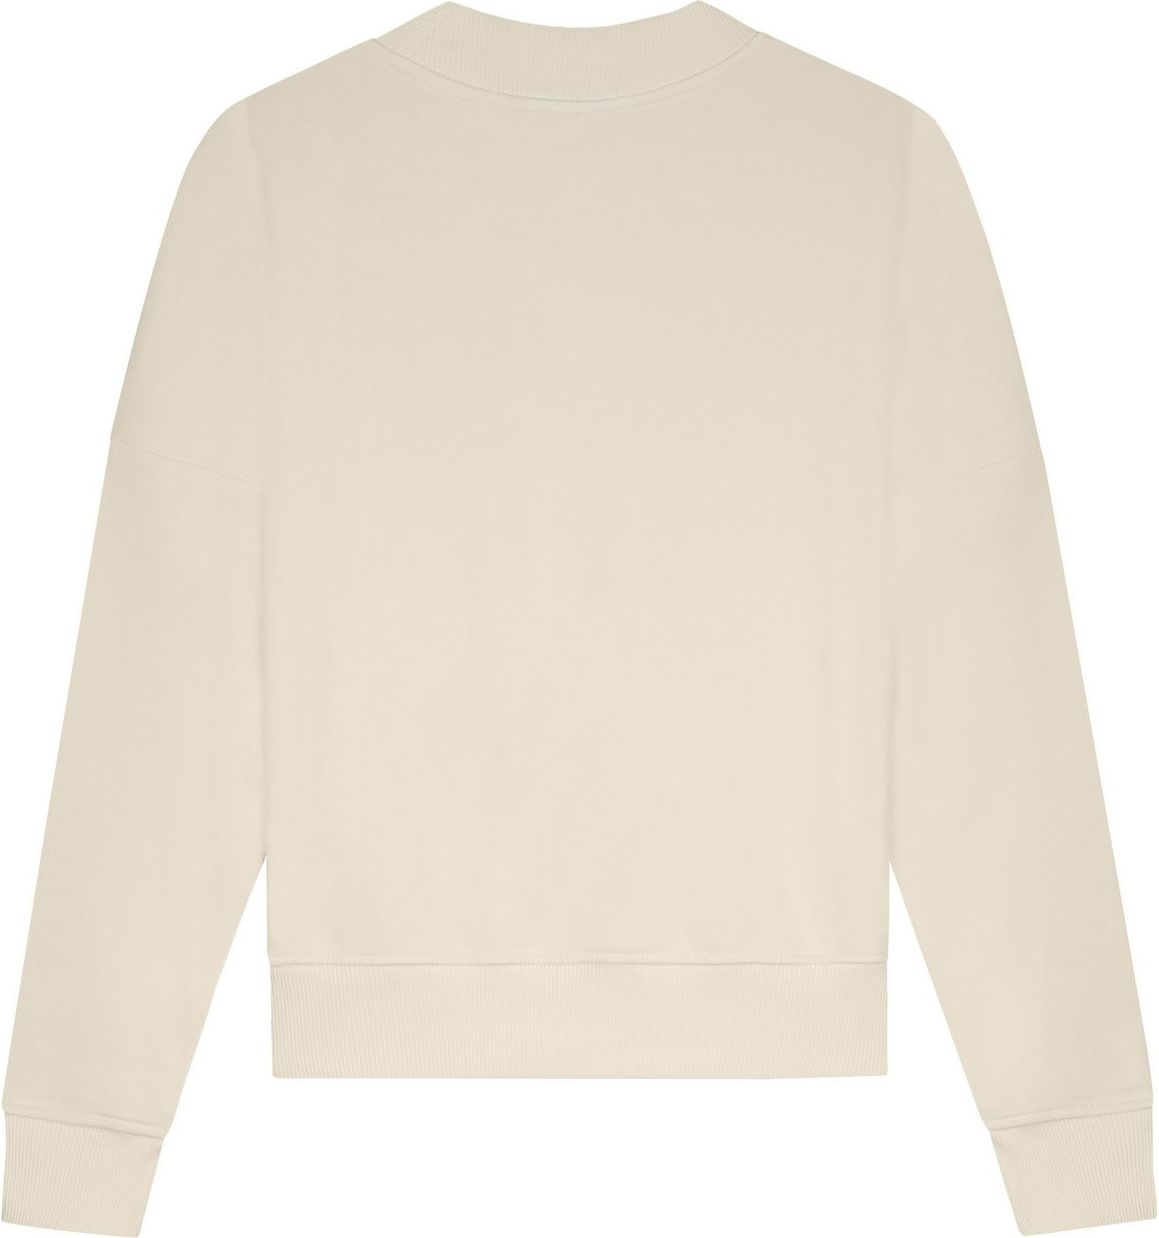 Malelions Brand Sweater - Off-White/Taupe Wit